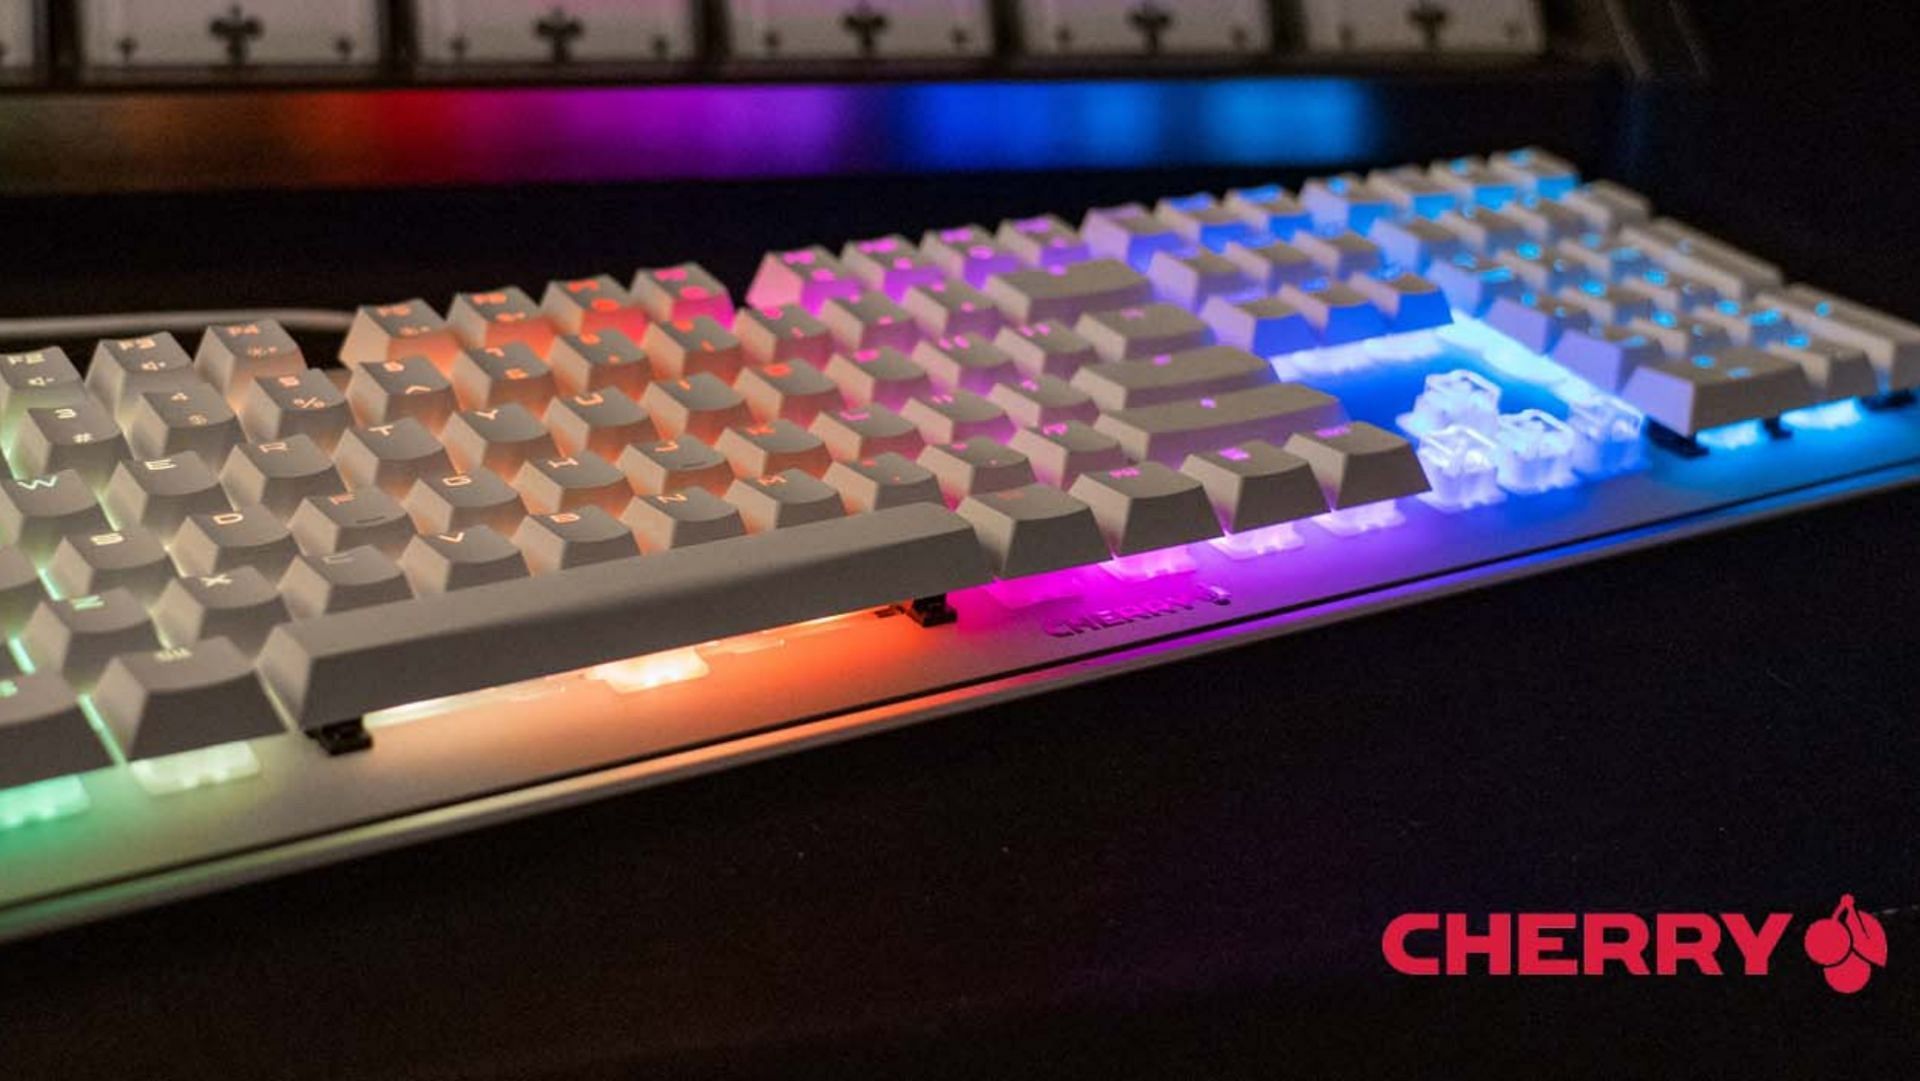 The Cherry switches have been a force to reckon with in the mechanical keyboard business (Image via Cherry)